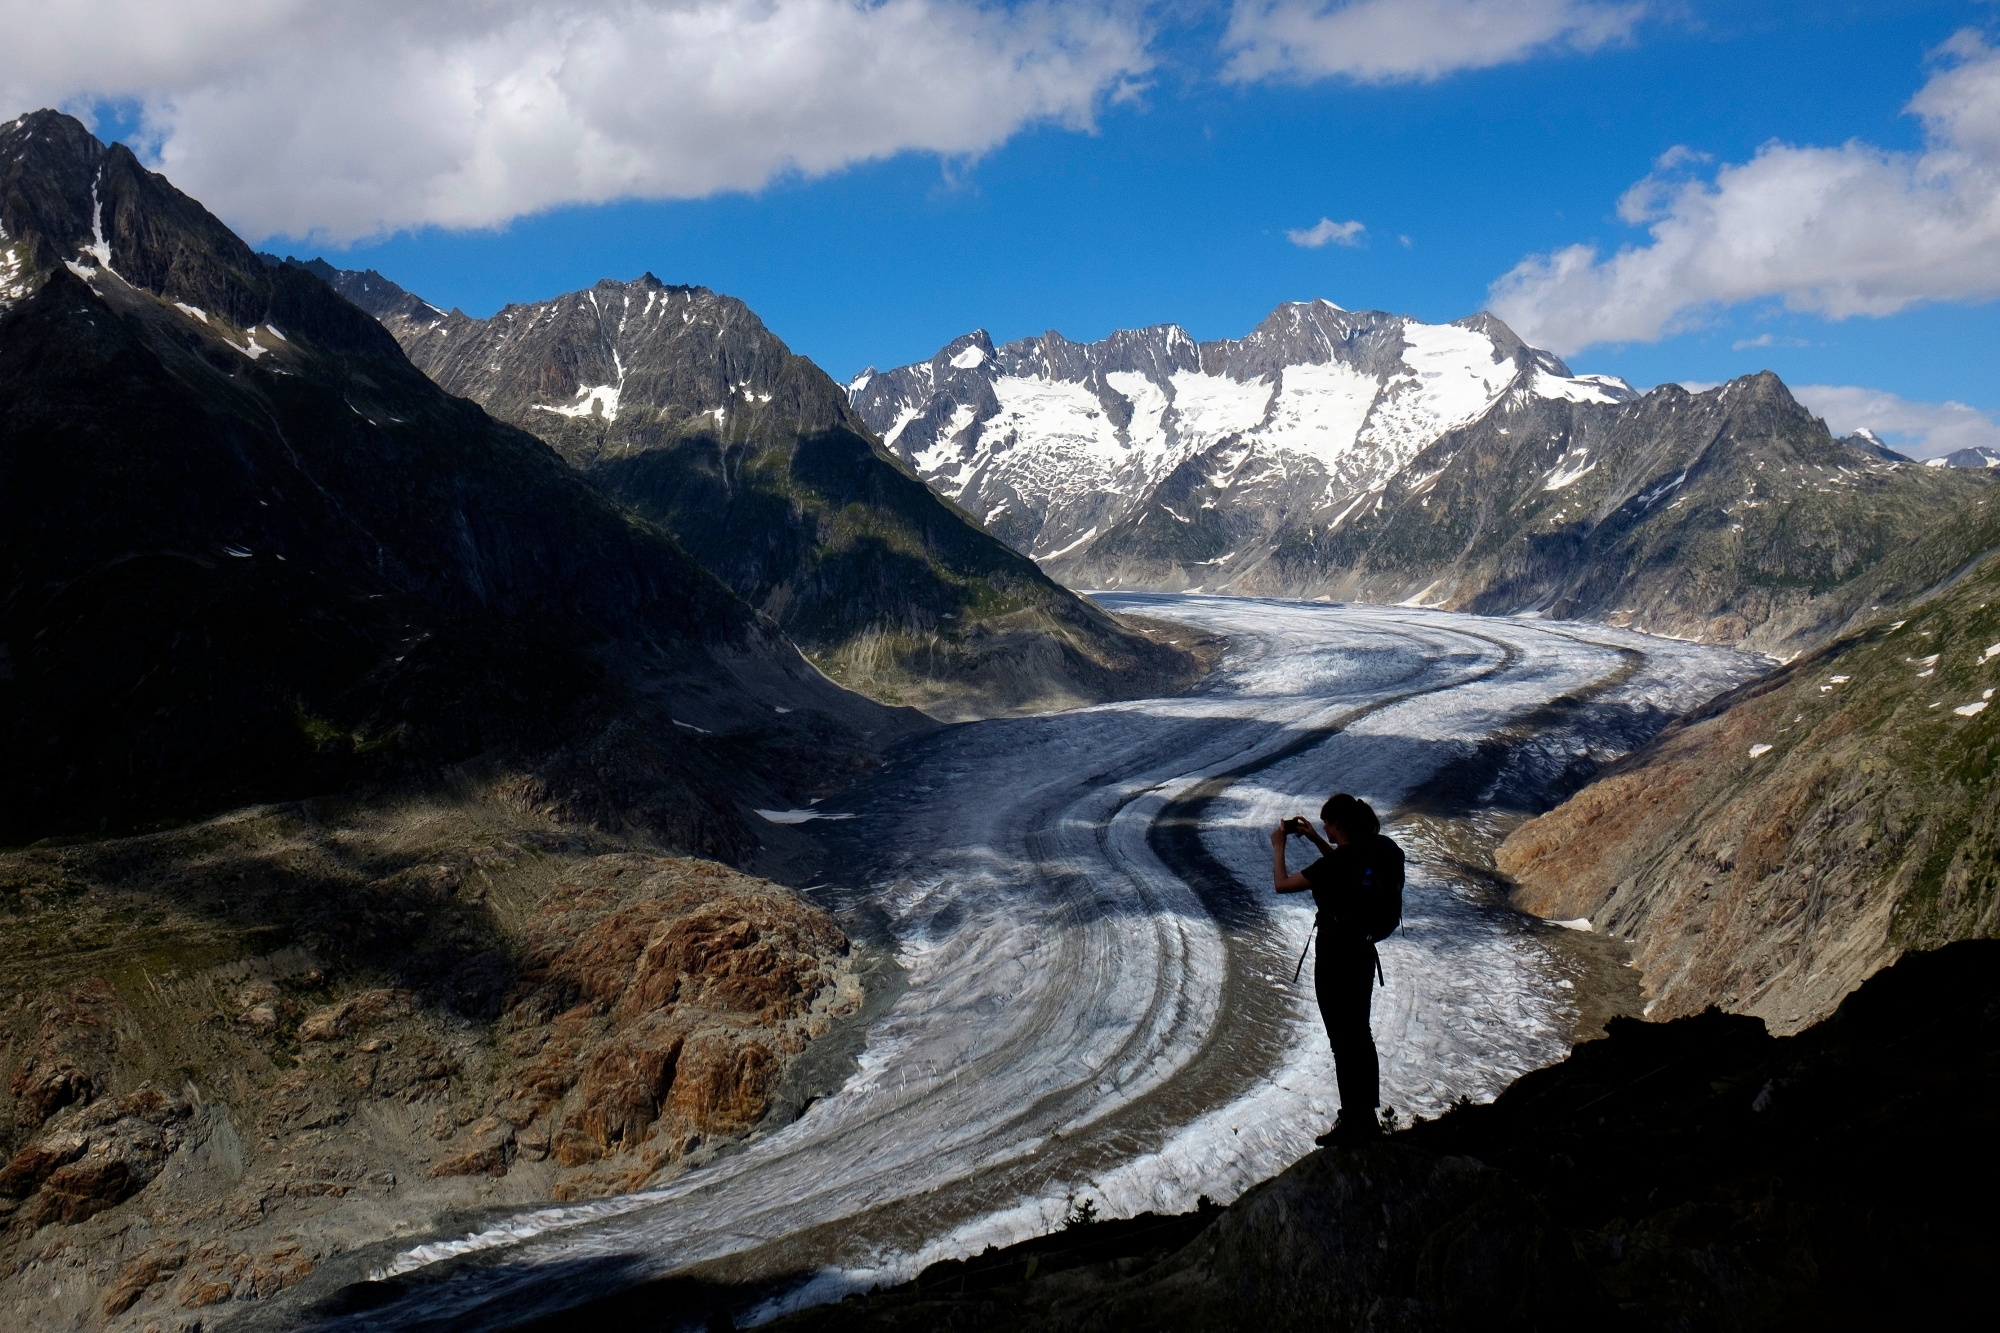 A woman takes a picture with her smartphone of the Swiss Aletsch Glacier during a beautiful summer day above Bettmeralp in Wallis, Switzerland, this Saturday, July 7, 2018. The Swiss Aletsch glacier, one of the largest ice streams in Europe, is the first Unesco World Heritage Site of the Alps. This huge river of ice that stretches over 23 km from its formation in the Jungfrau region (at 4000 m) down to the Massa Gorge in Wallis, around 2500 m below, fascinates and inspires every visitor. (KEYSTONE/Anthony Anex)
ArcInfo